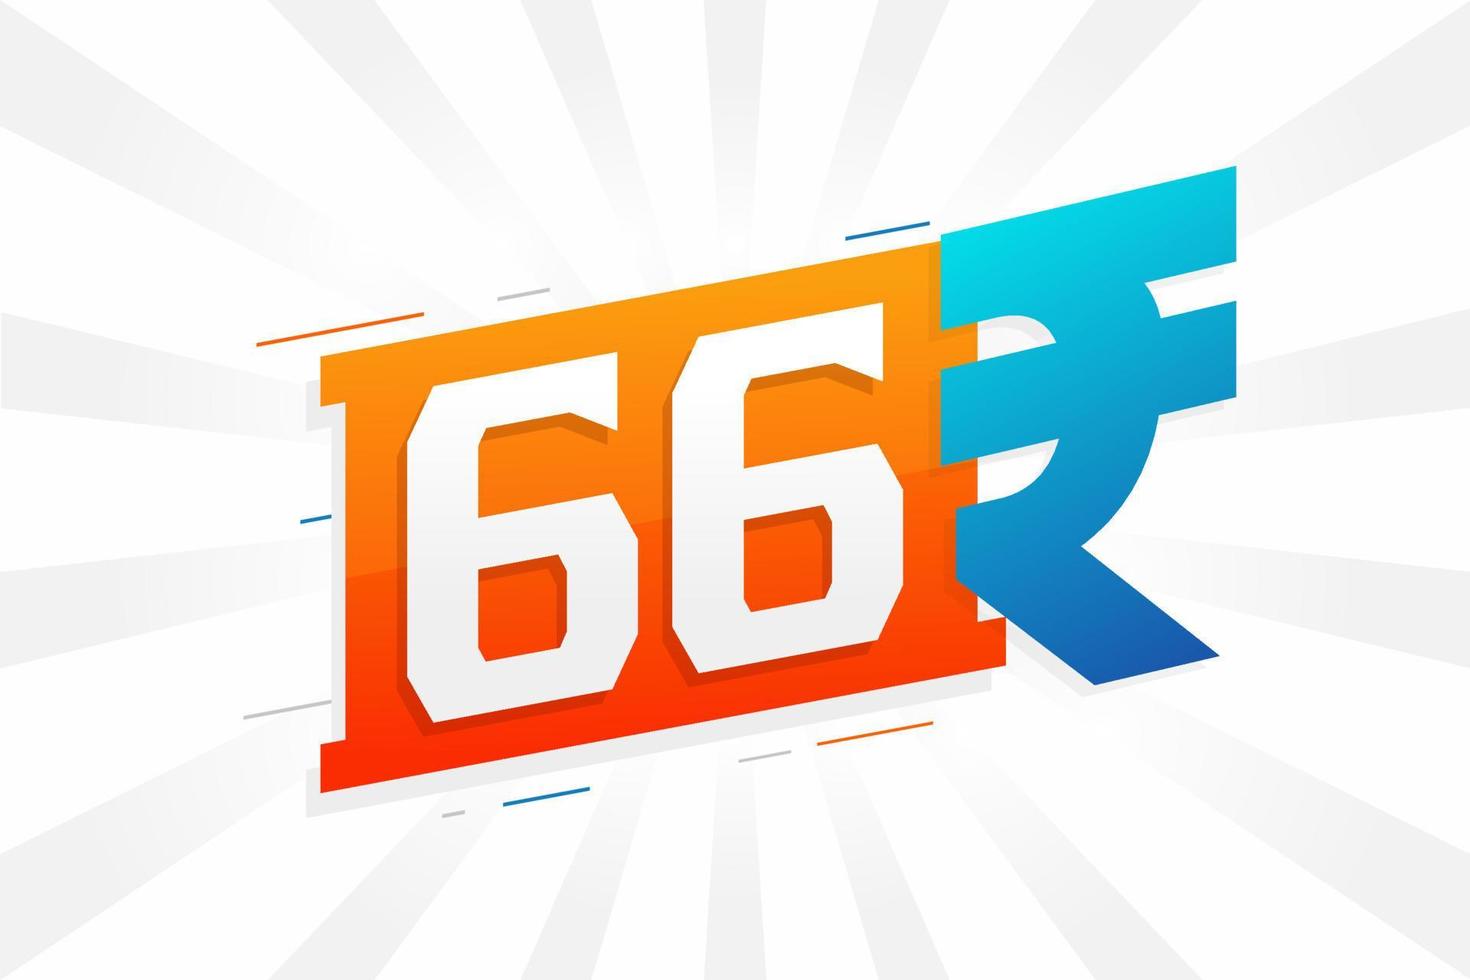 66 Rupee symbol bold text vector image. 66 Indian Rupee currency sign vector illustration